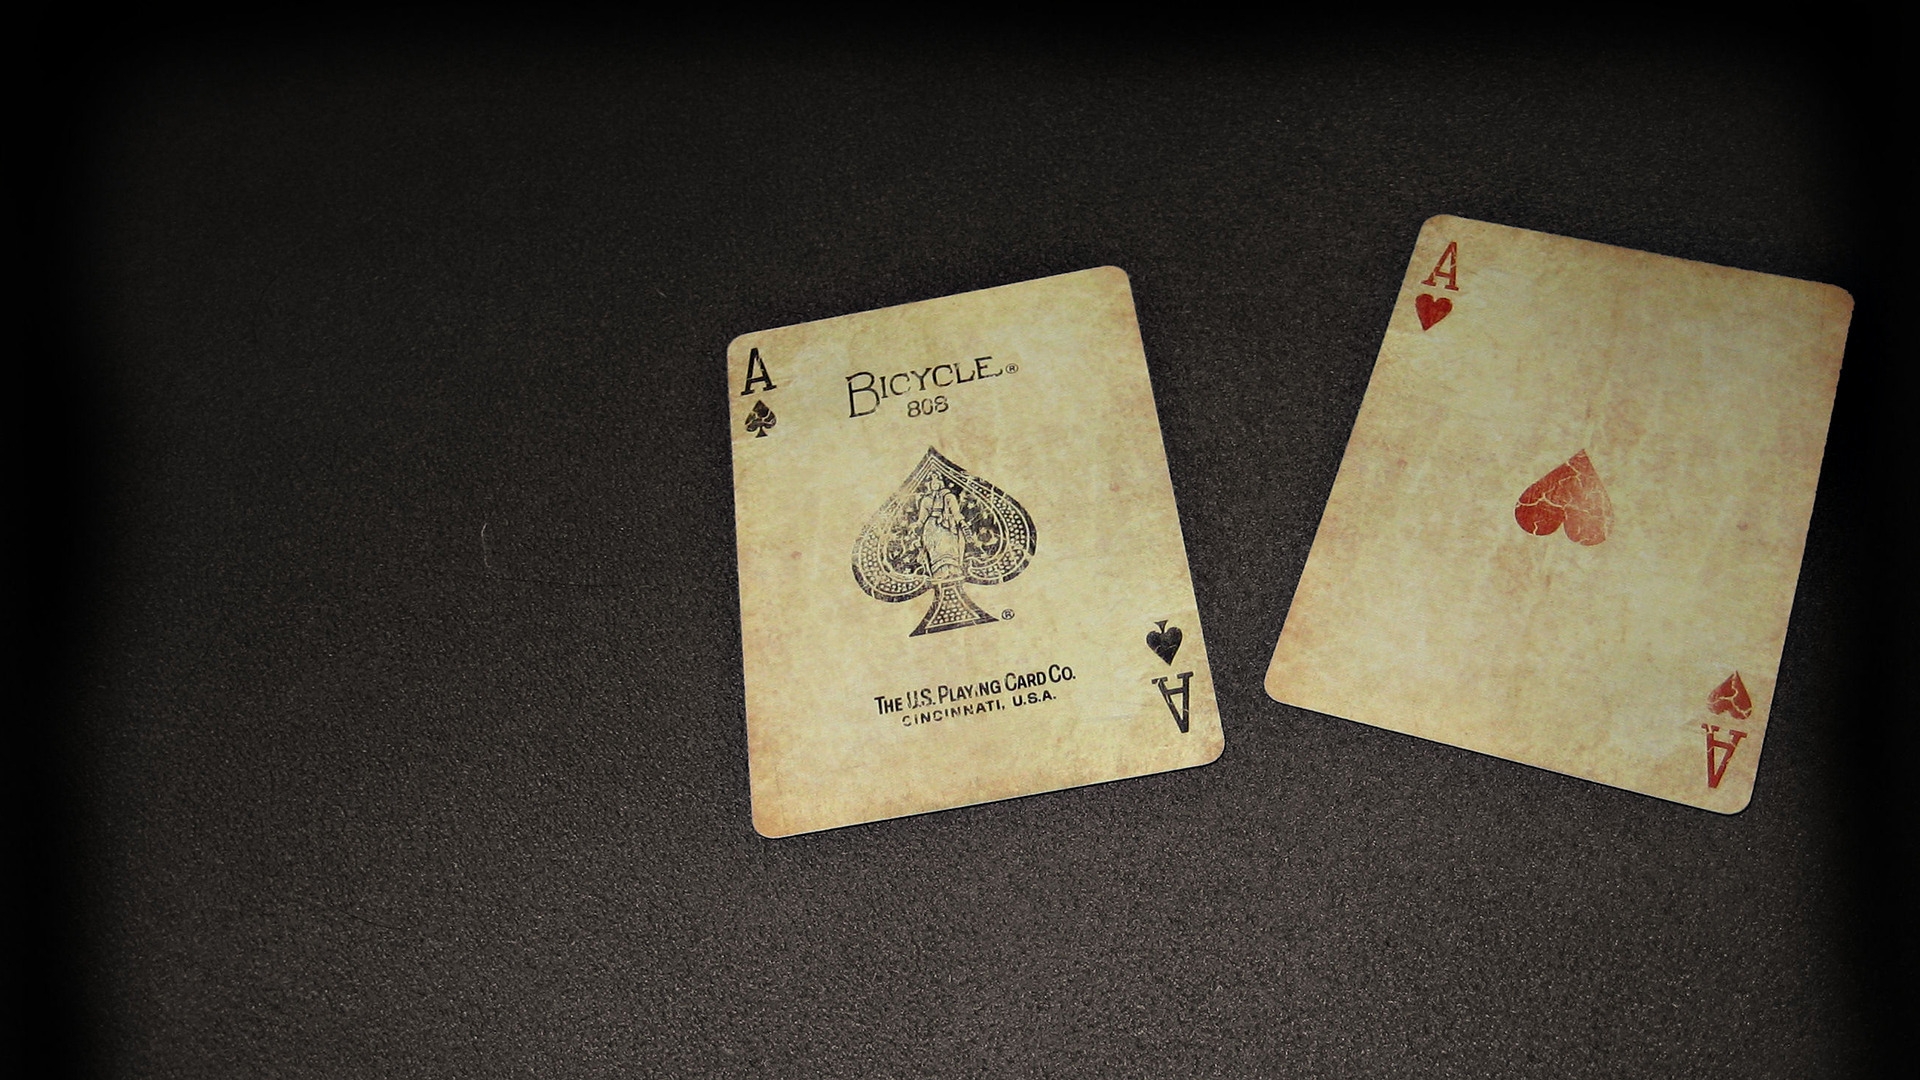 Download 1920x1080 HD Wallpaper cards ace casino vintage